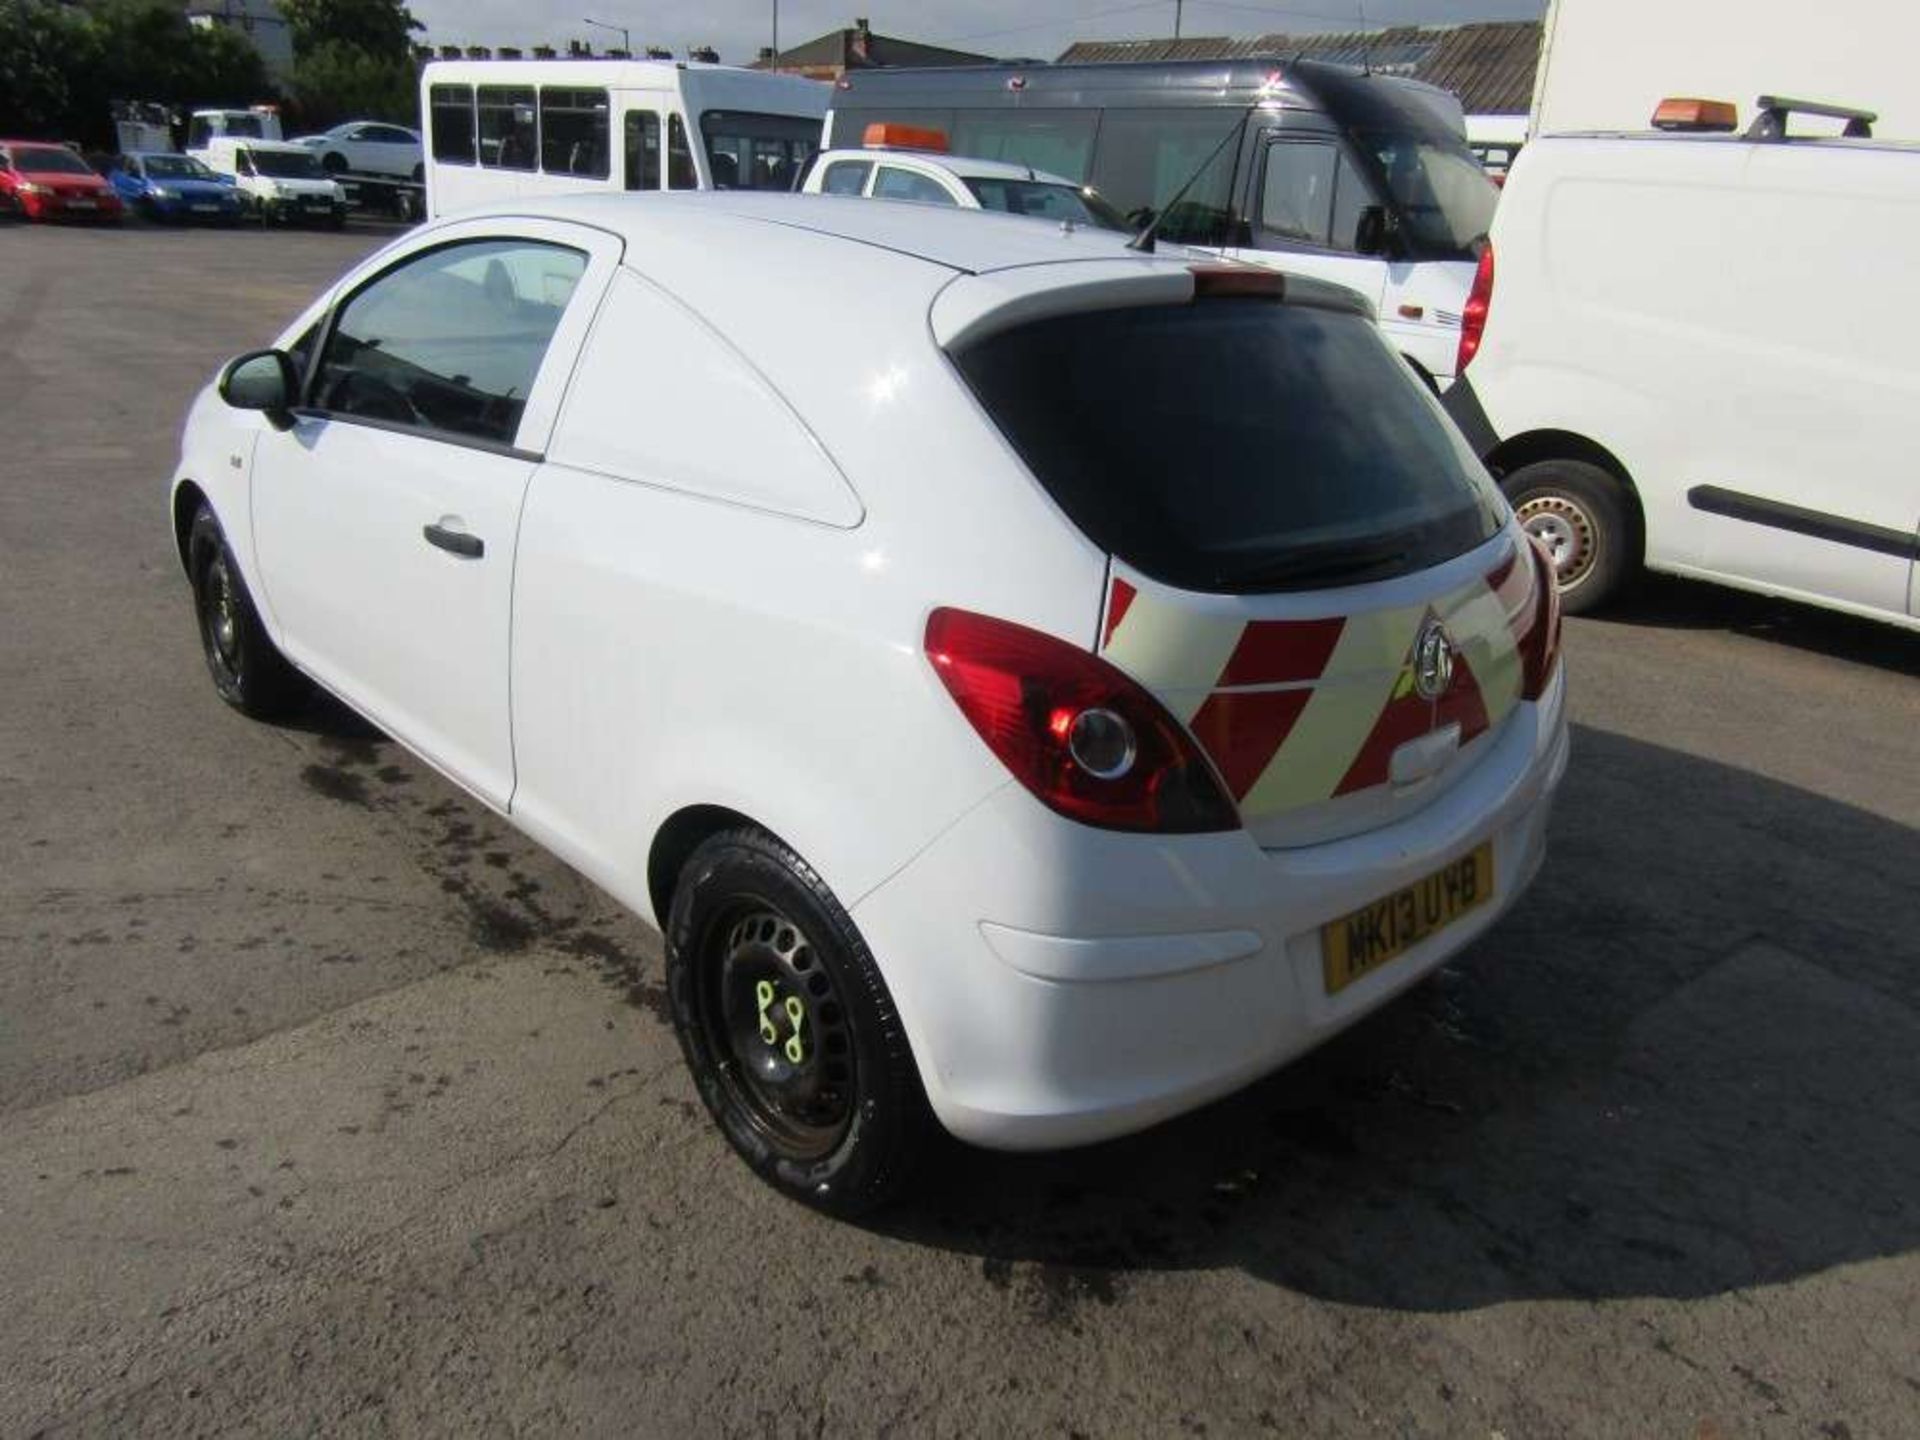 2013 13 reg Vauxhall Corsa CDTI (Runs & Drives but Suspected Gearbox Issues) (Direct ENW) - Image 3 of 7